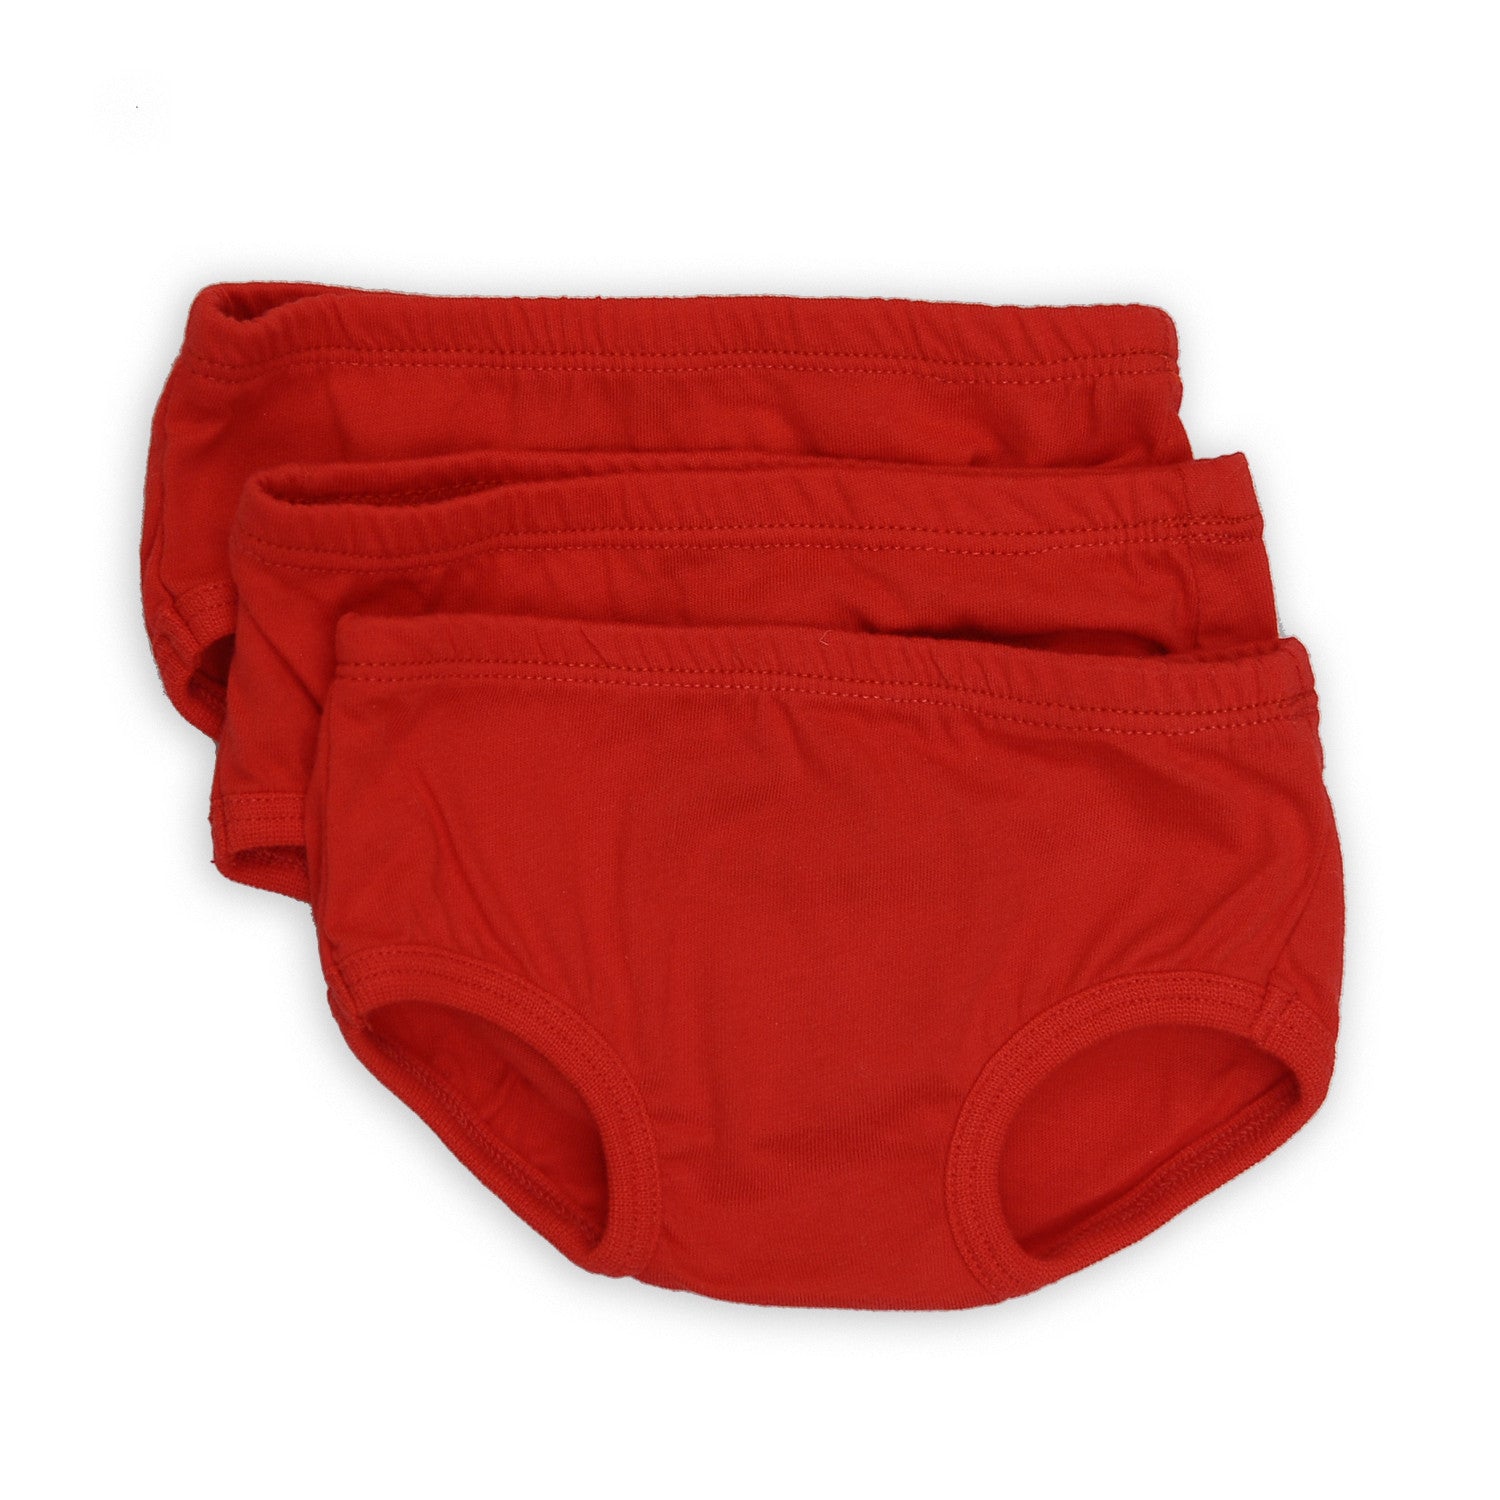 CLEARANCE Tiny Undies small baby underwear, 3-pack